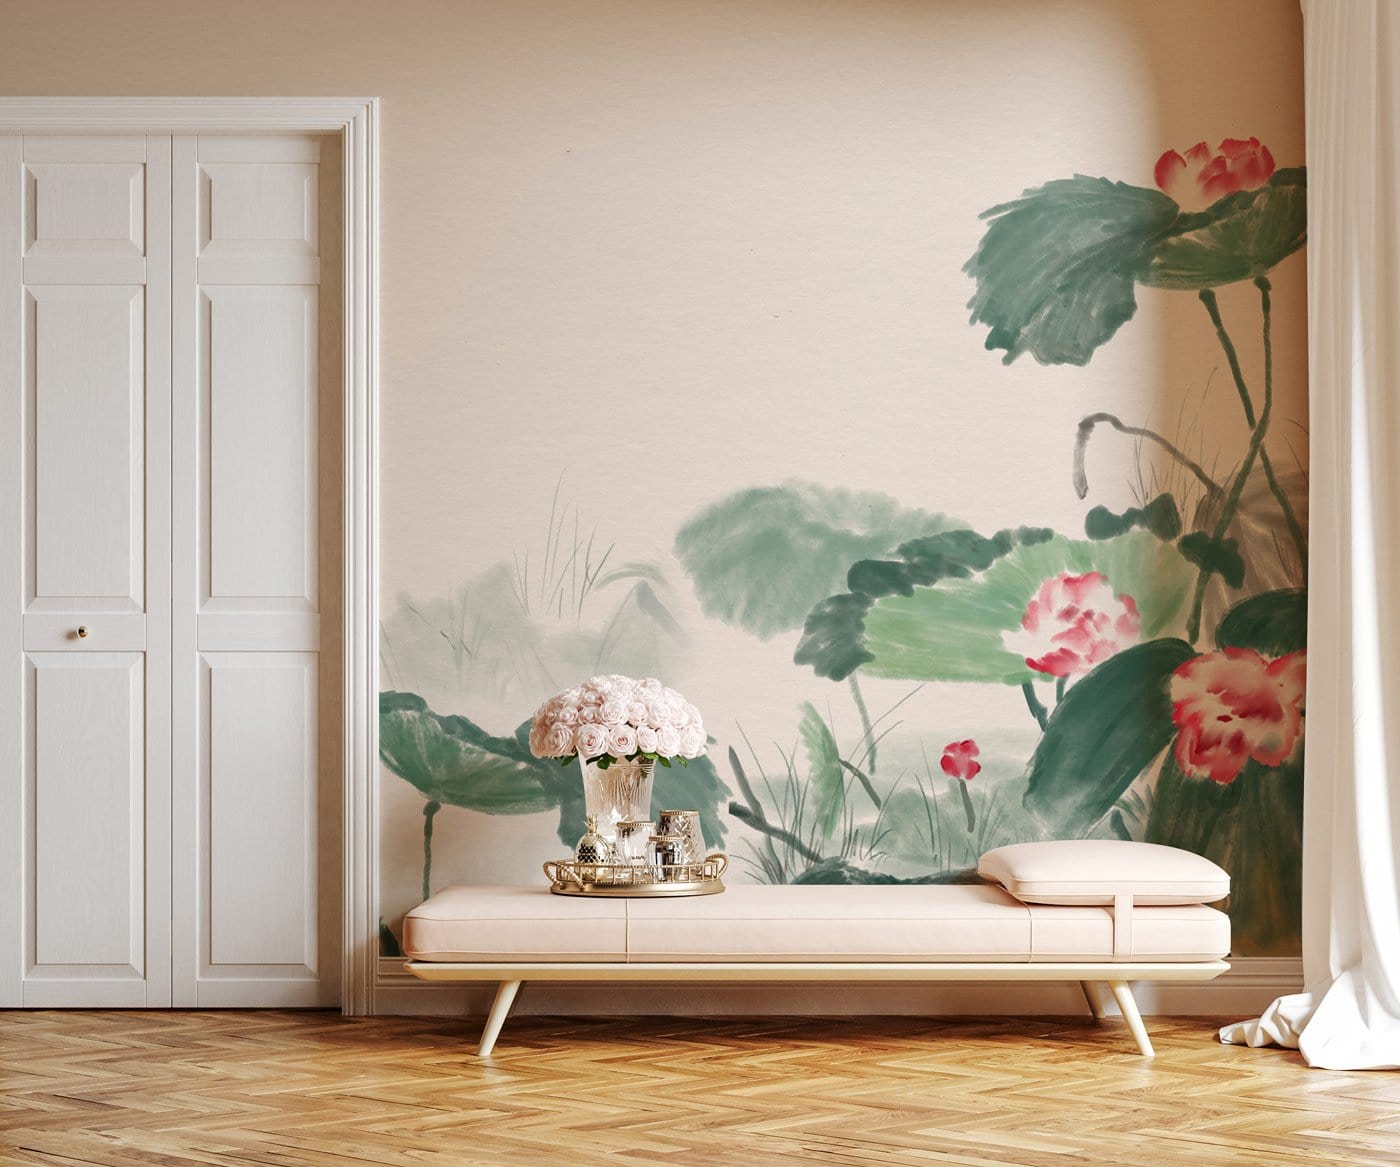 Mural Wallpaper in the Form of a Watercolor Lotus Flower for the Hallway Decor